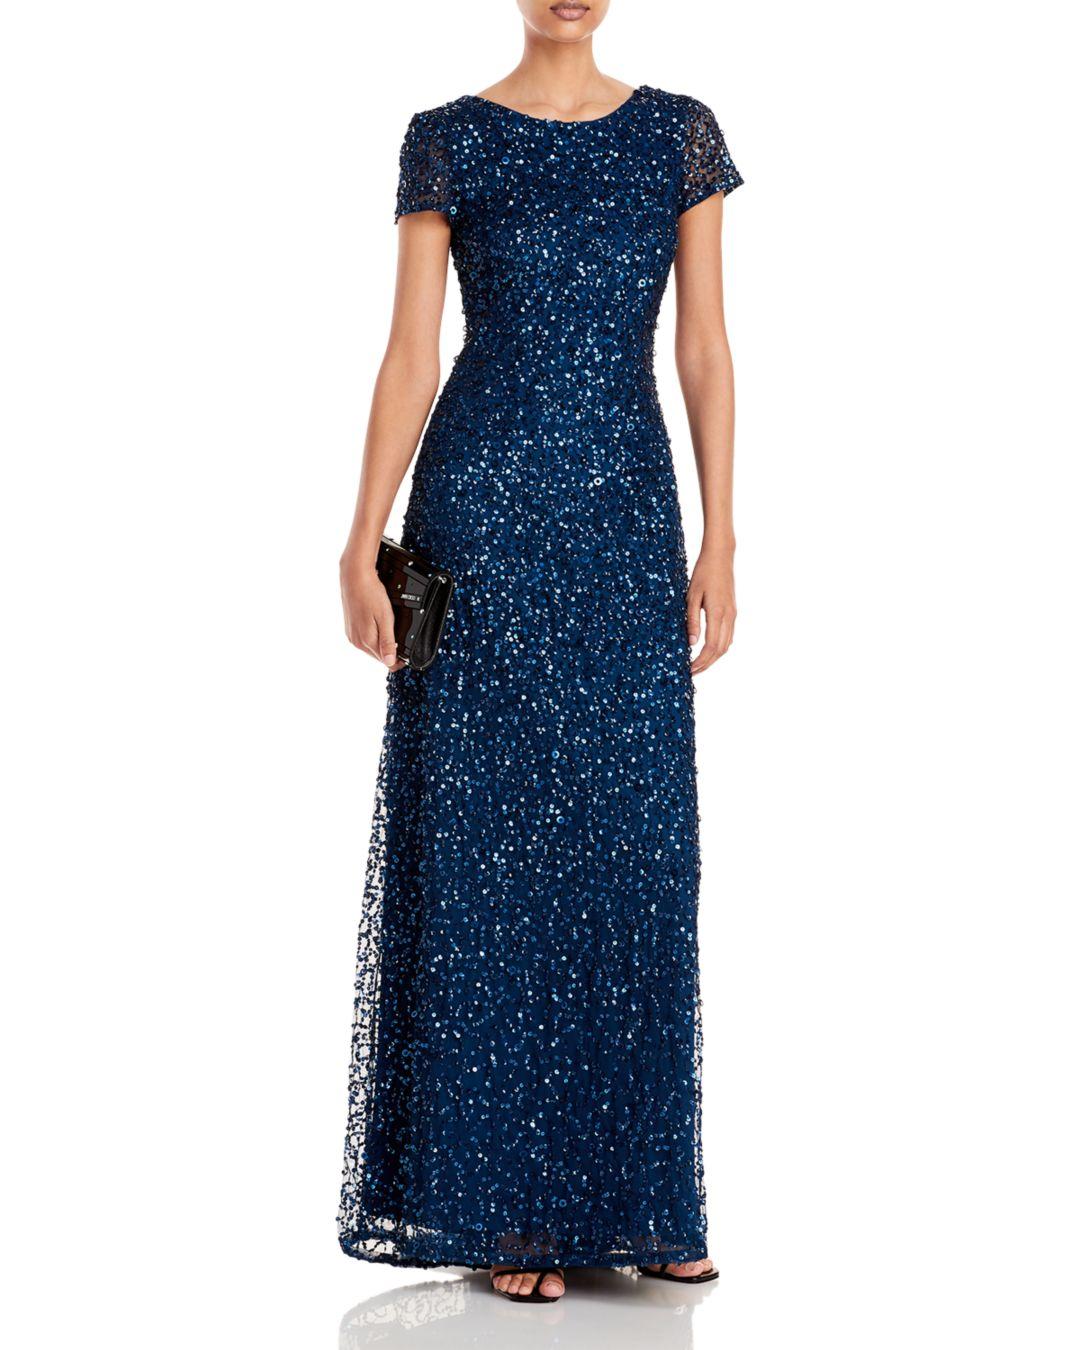 Adrianna Papell Navy Scoop Back Sequin Gown Long Formal Dress Listed By  Adina's Bridal Tradesy | wikingerparts.de